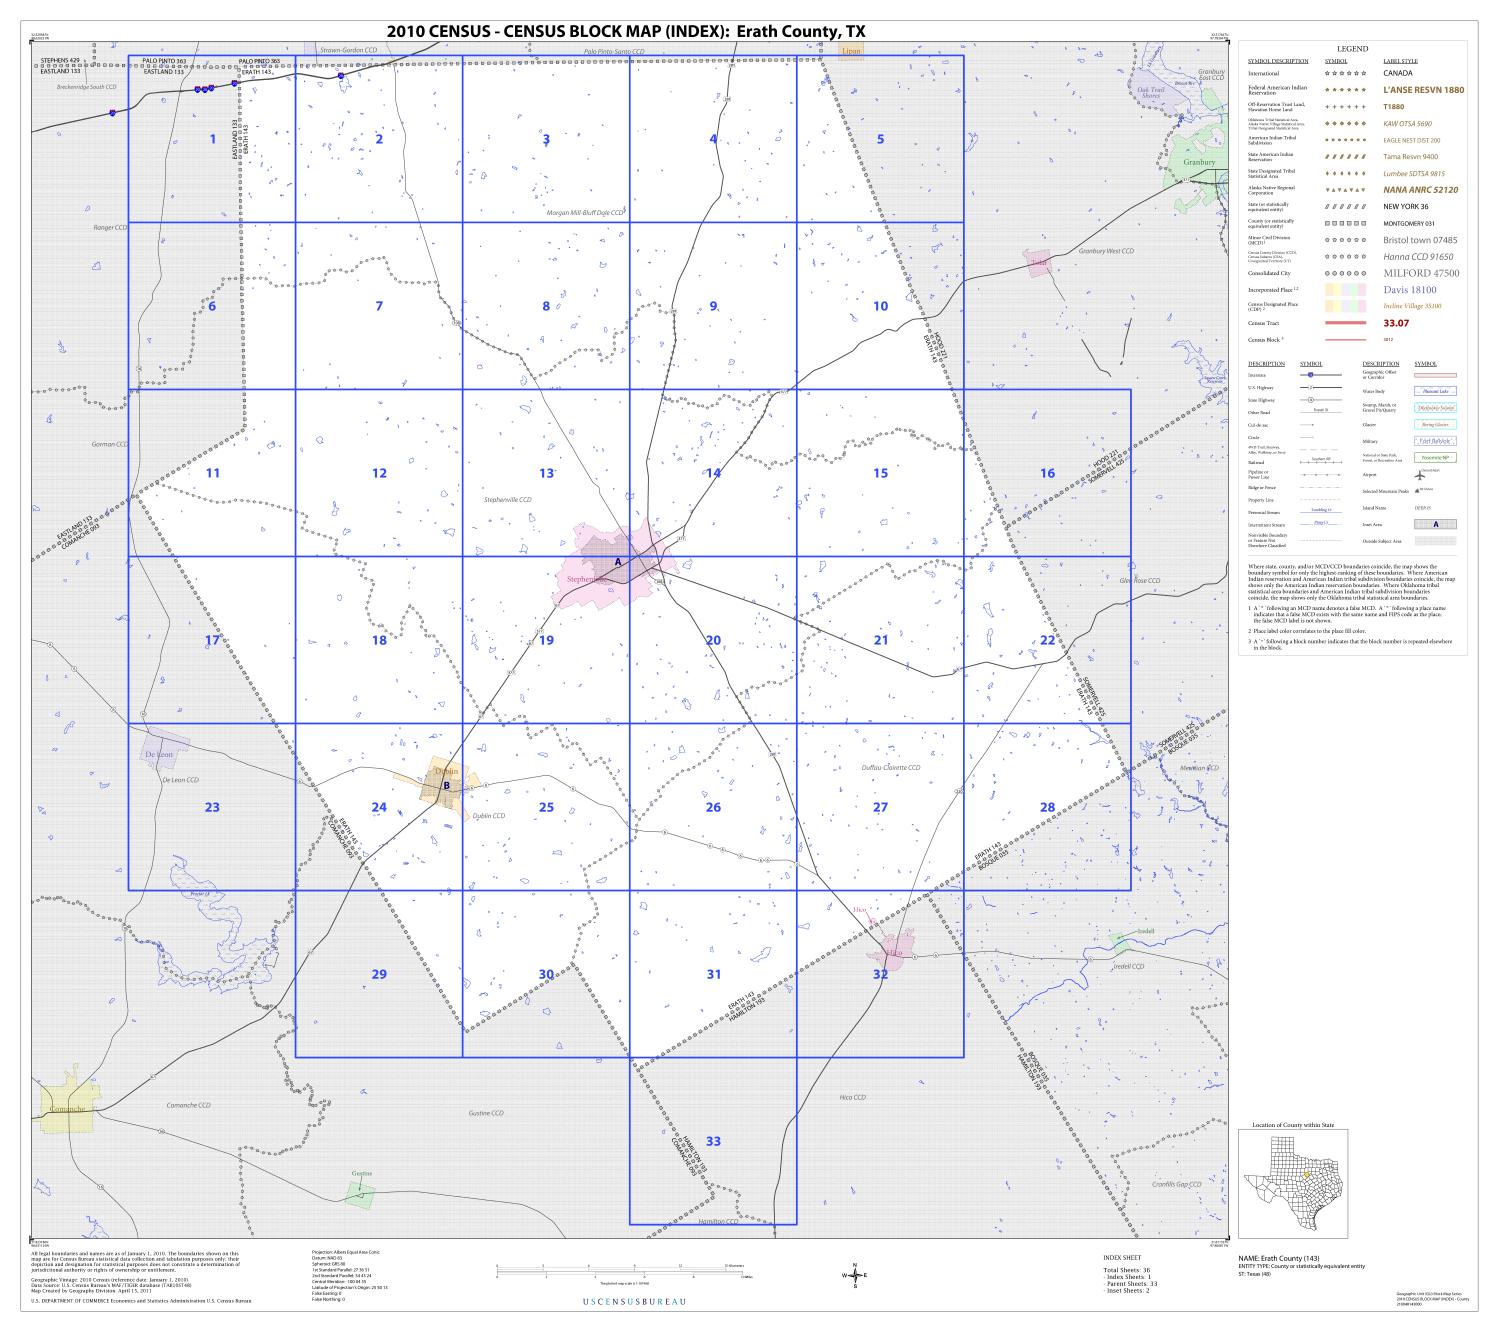 2010 Census County Block Map Erath County Index Side 1 Of 1 The